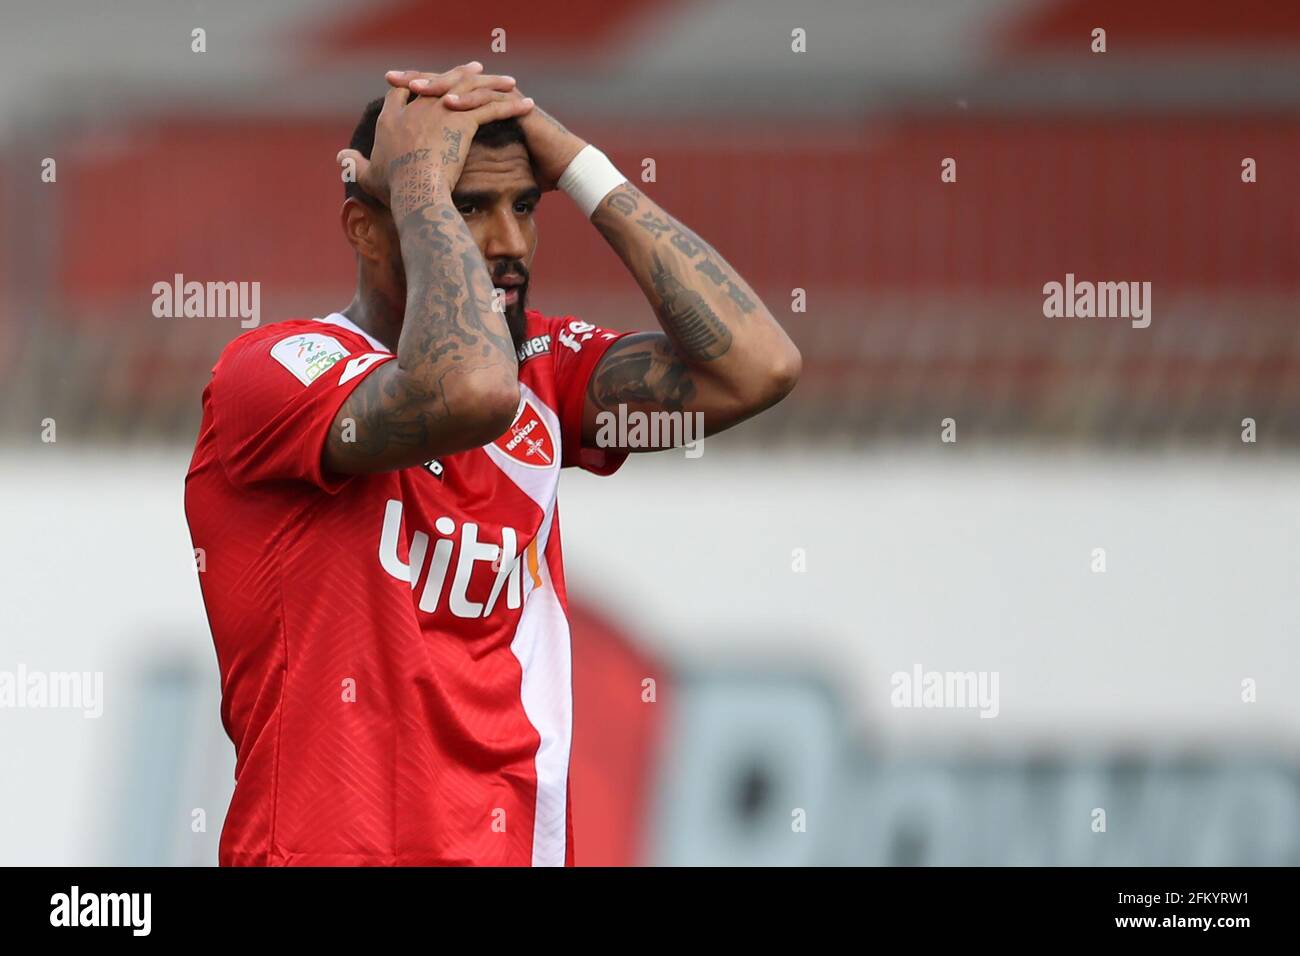 Monza, , 4th May 2021. Kevin Prince-Boateng of AC Monza reacts after going close to scoring during the Serie B match at U-Power Stadium, Monza. Picture credit should read: Jonathan Moscrop / Sportimage Stock Photo